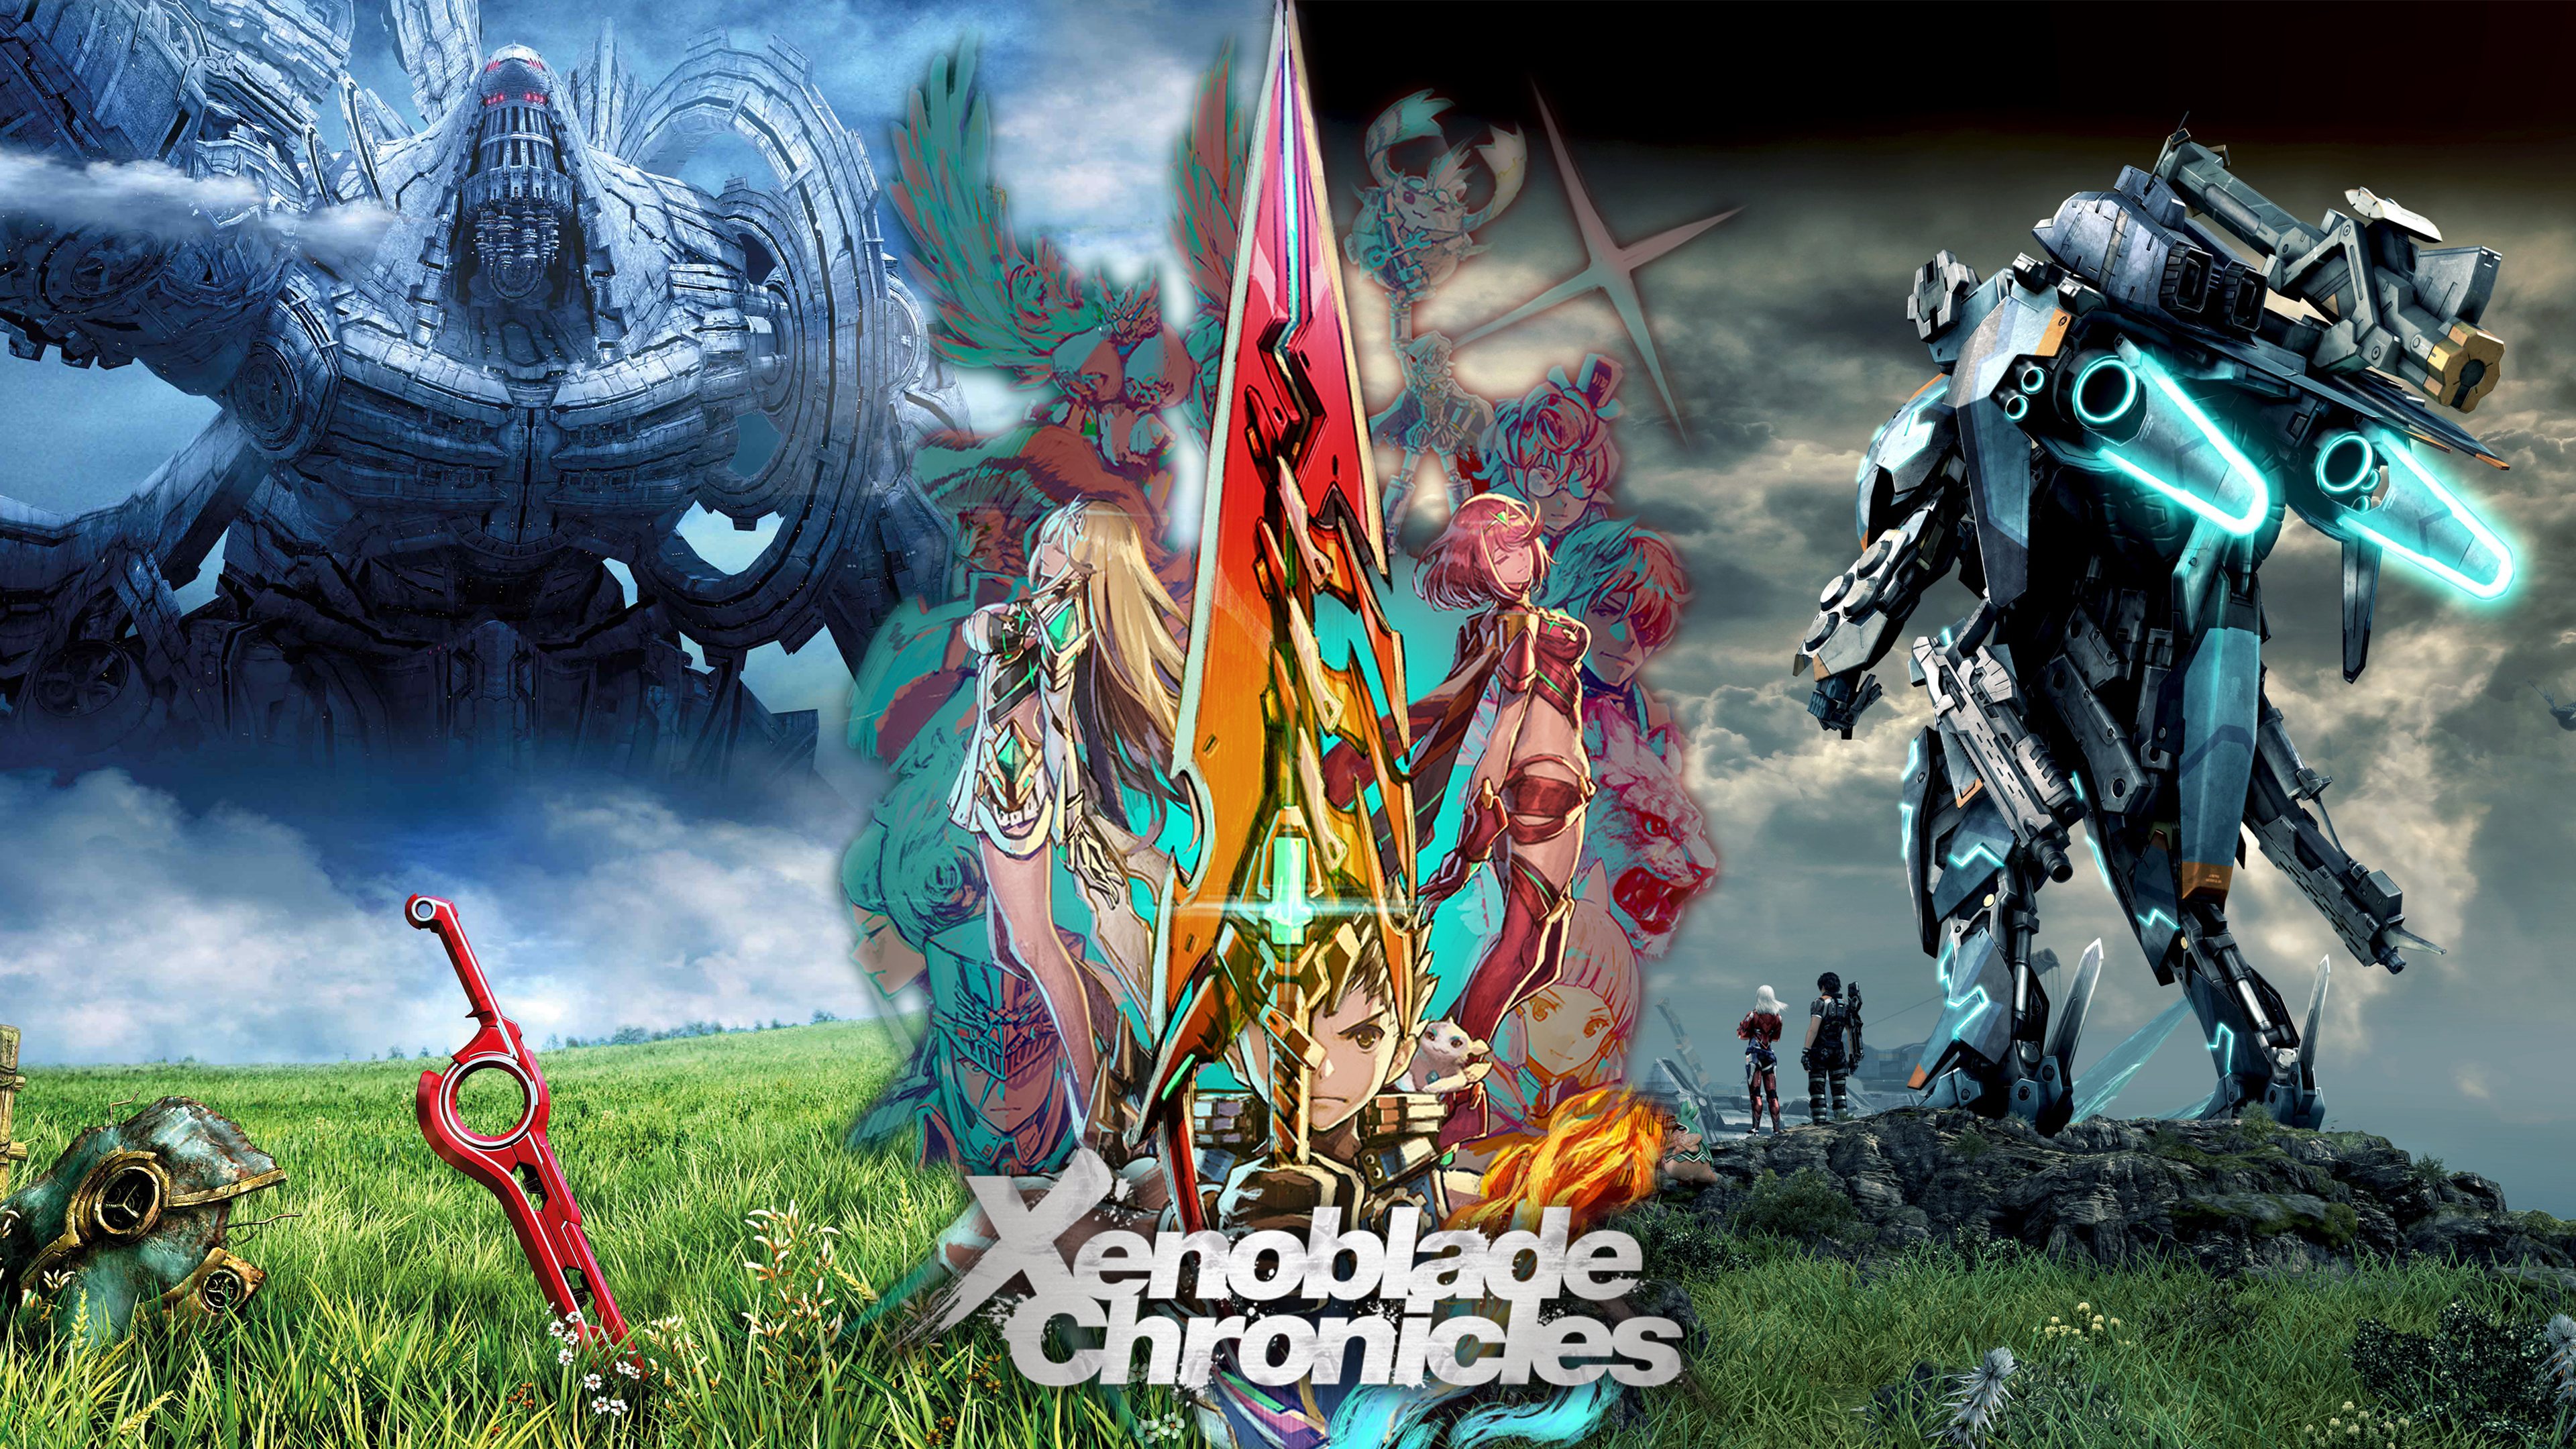 I Made A 4k Wallpaper For All Xenoblade Chronicles